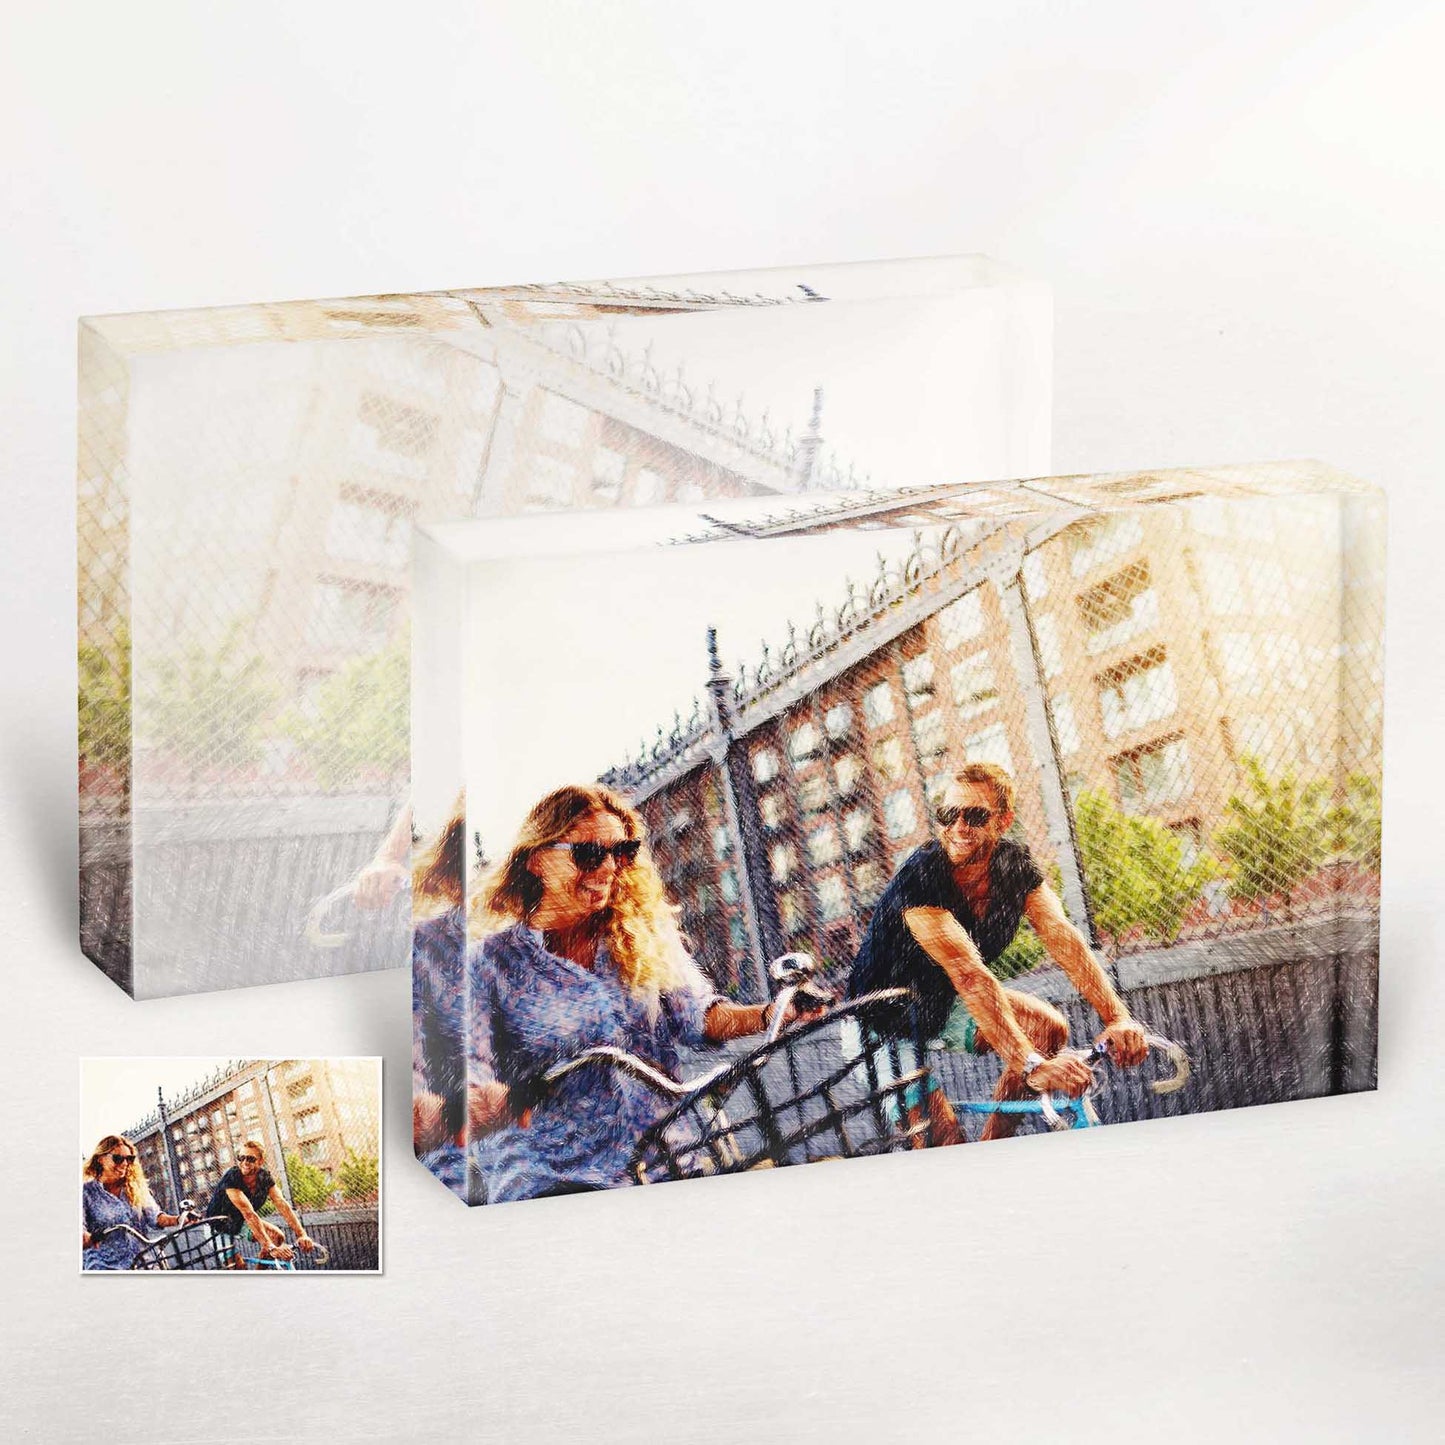 Add a touch of sophistication to your decor with our Personalised Colourful Drawing Acrylic Block Photo. Its chic and vibrant design showcases your family and friends in a unique and artistic way, making it a truly original and creative statement piece.